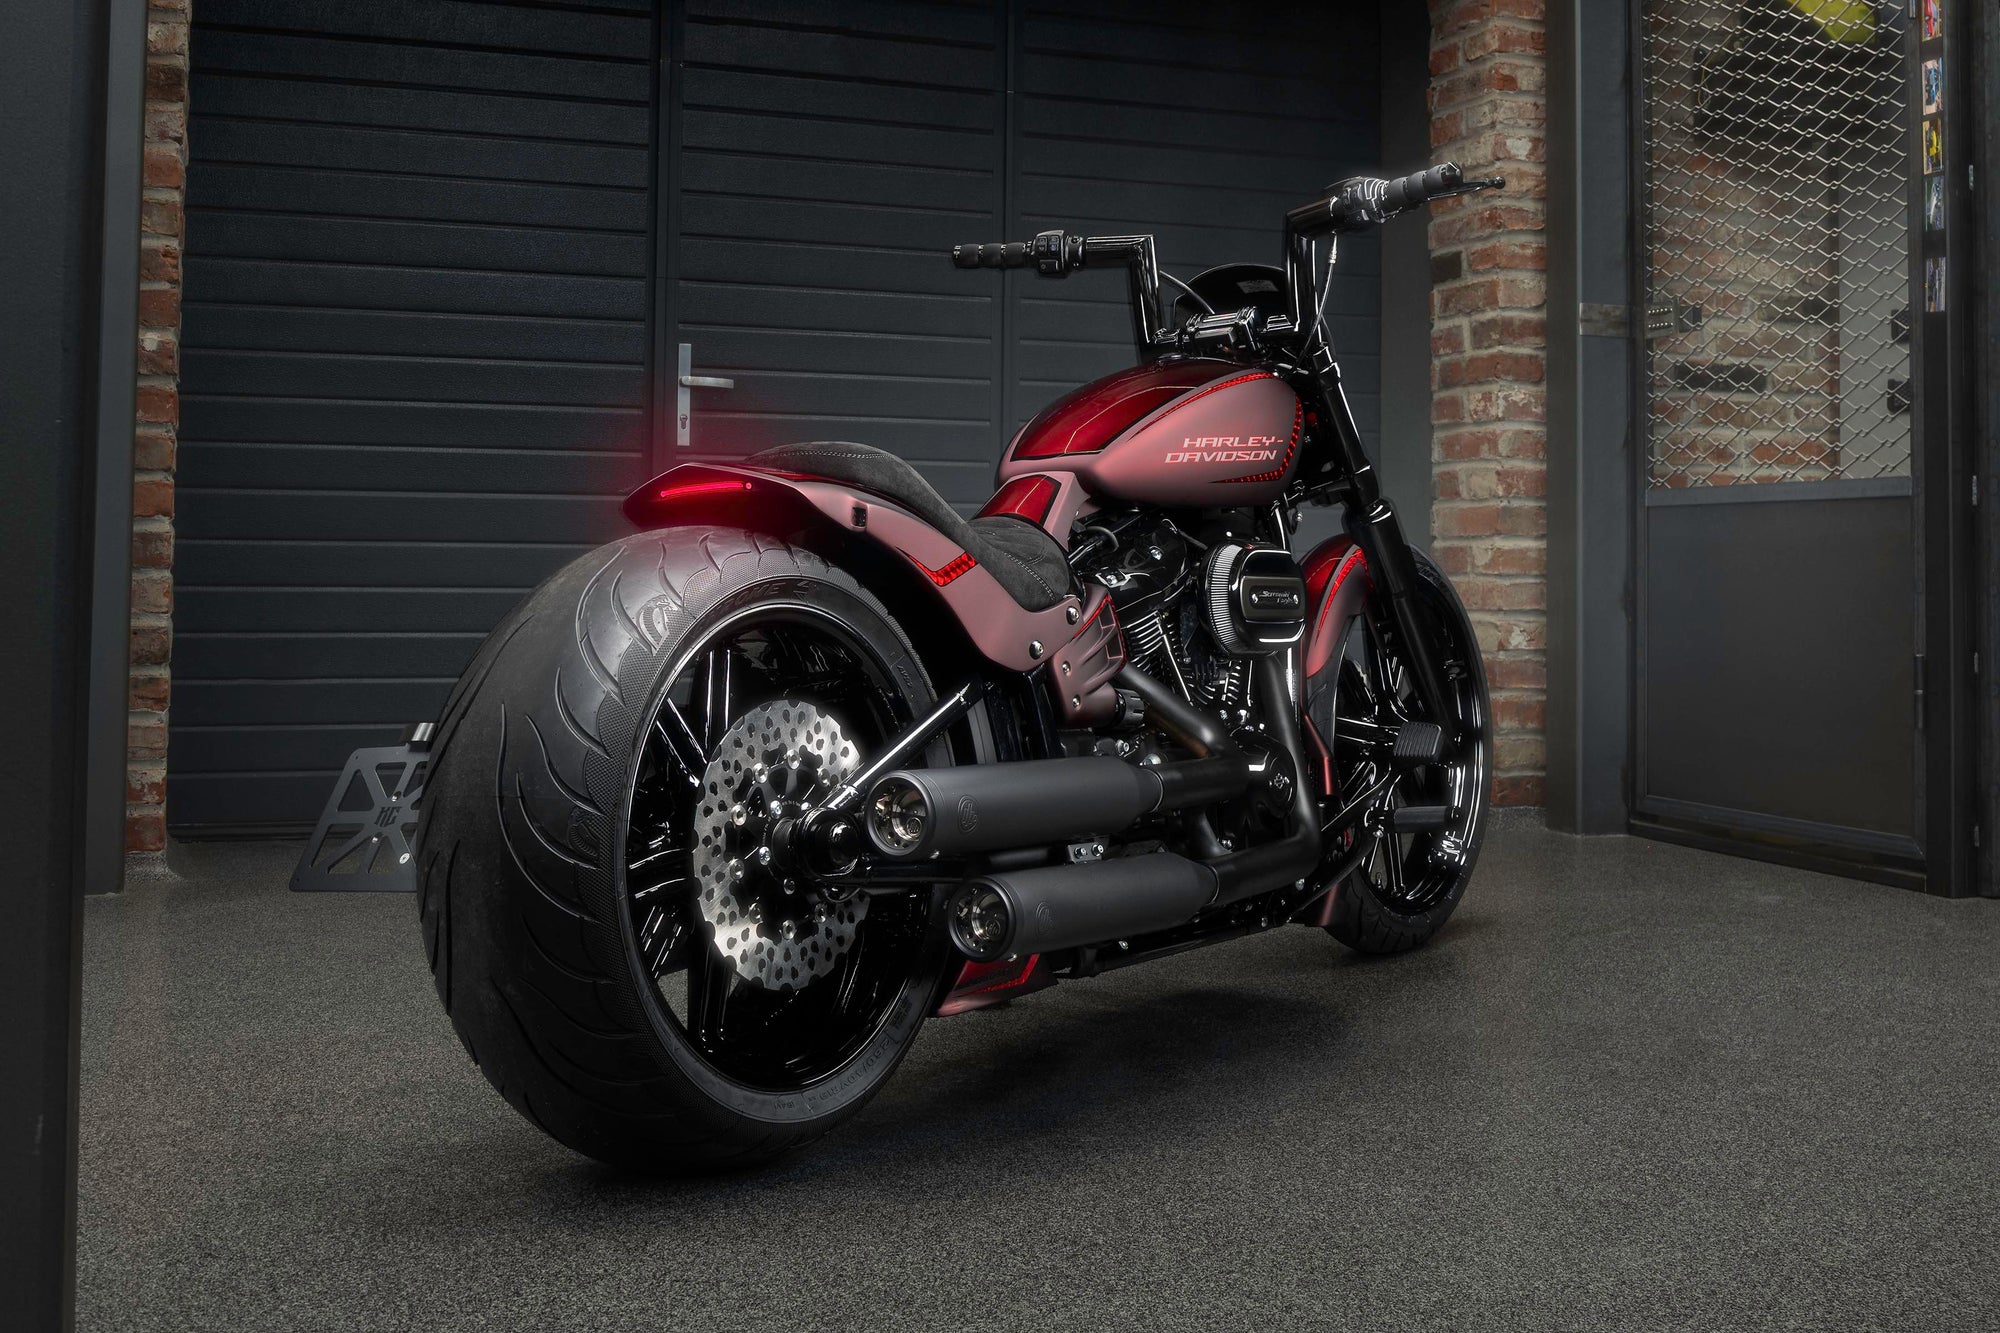  Harley Davidson motorcycle with Killer Custom parts from the rear in a modern garage